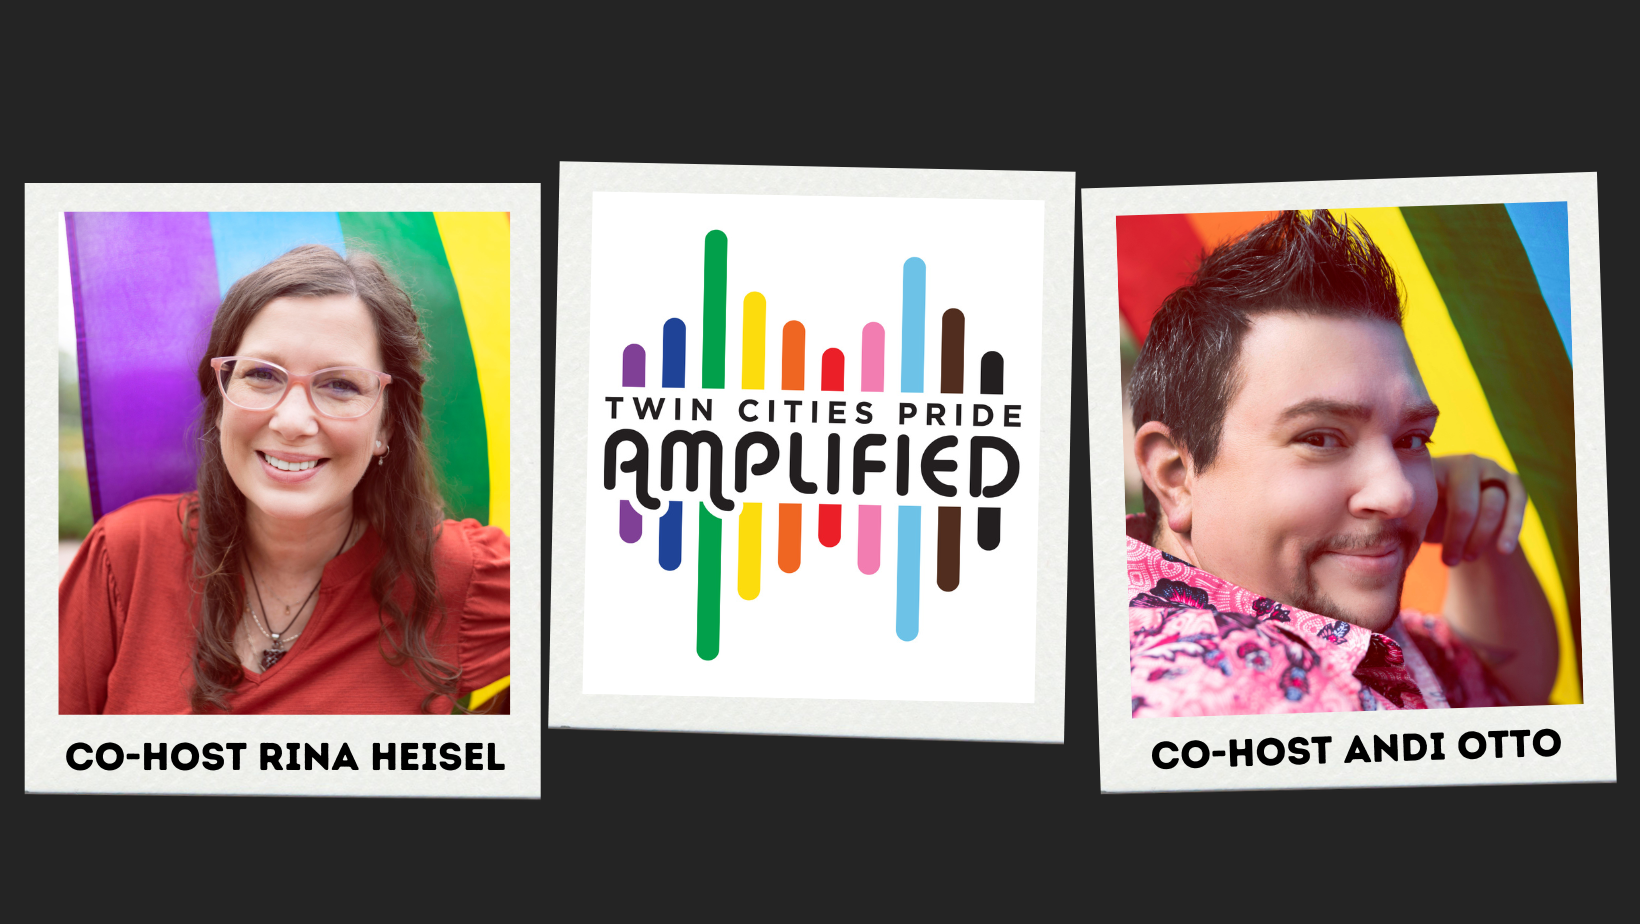 Black background with 3 polaroids, one that has a picture of a woman in front of a Pride flag and says "co-host Rina Heisel" and one of a man in front of a Pride flag that says "Co-Host Andi Otto" The middle polaroid says "Twin Cities Pride Amplified"